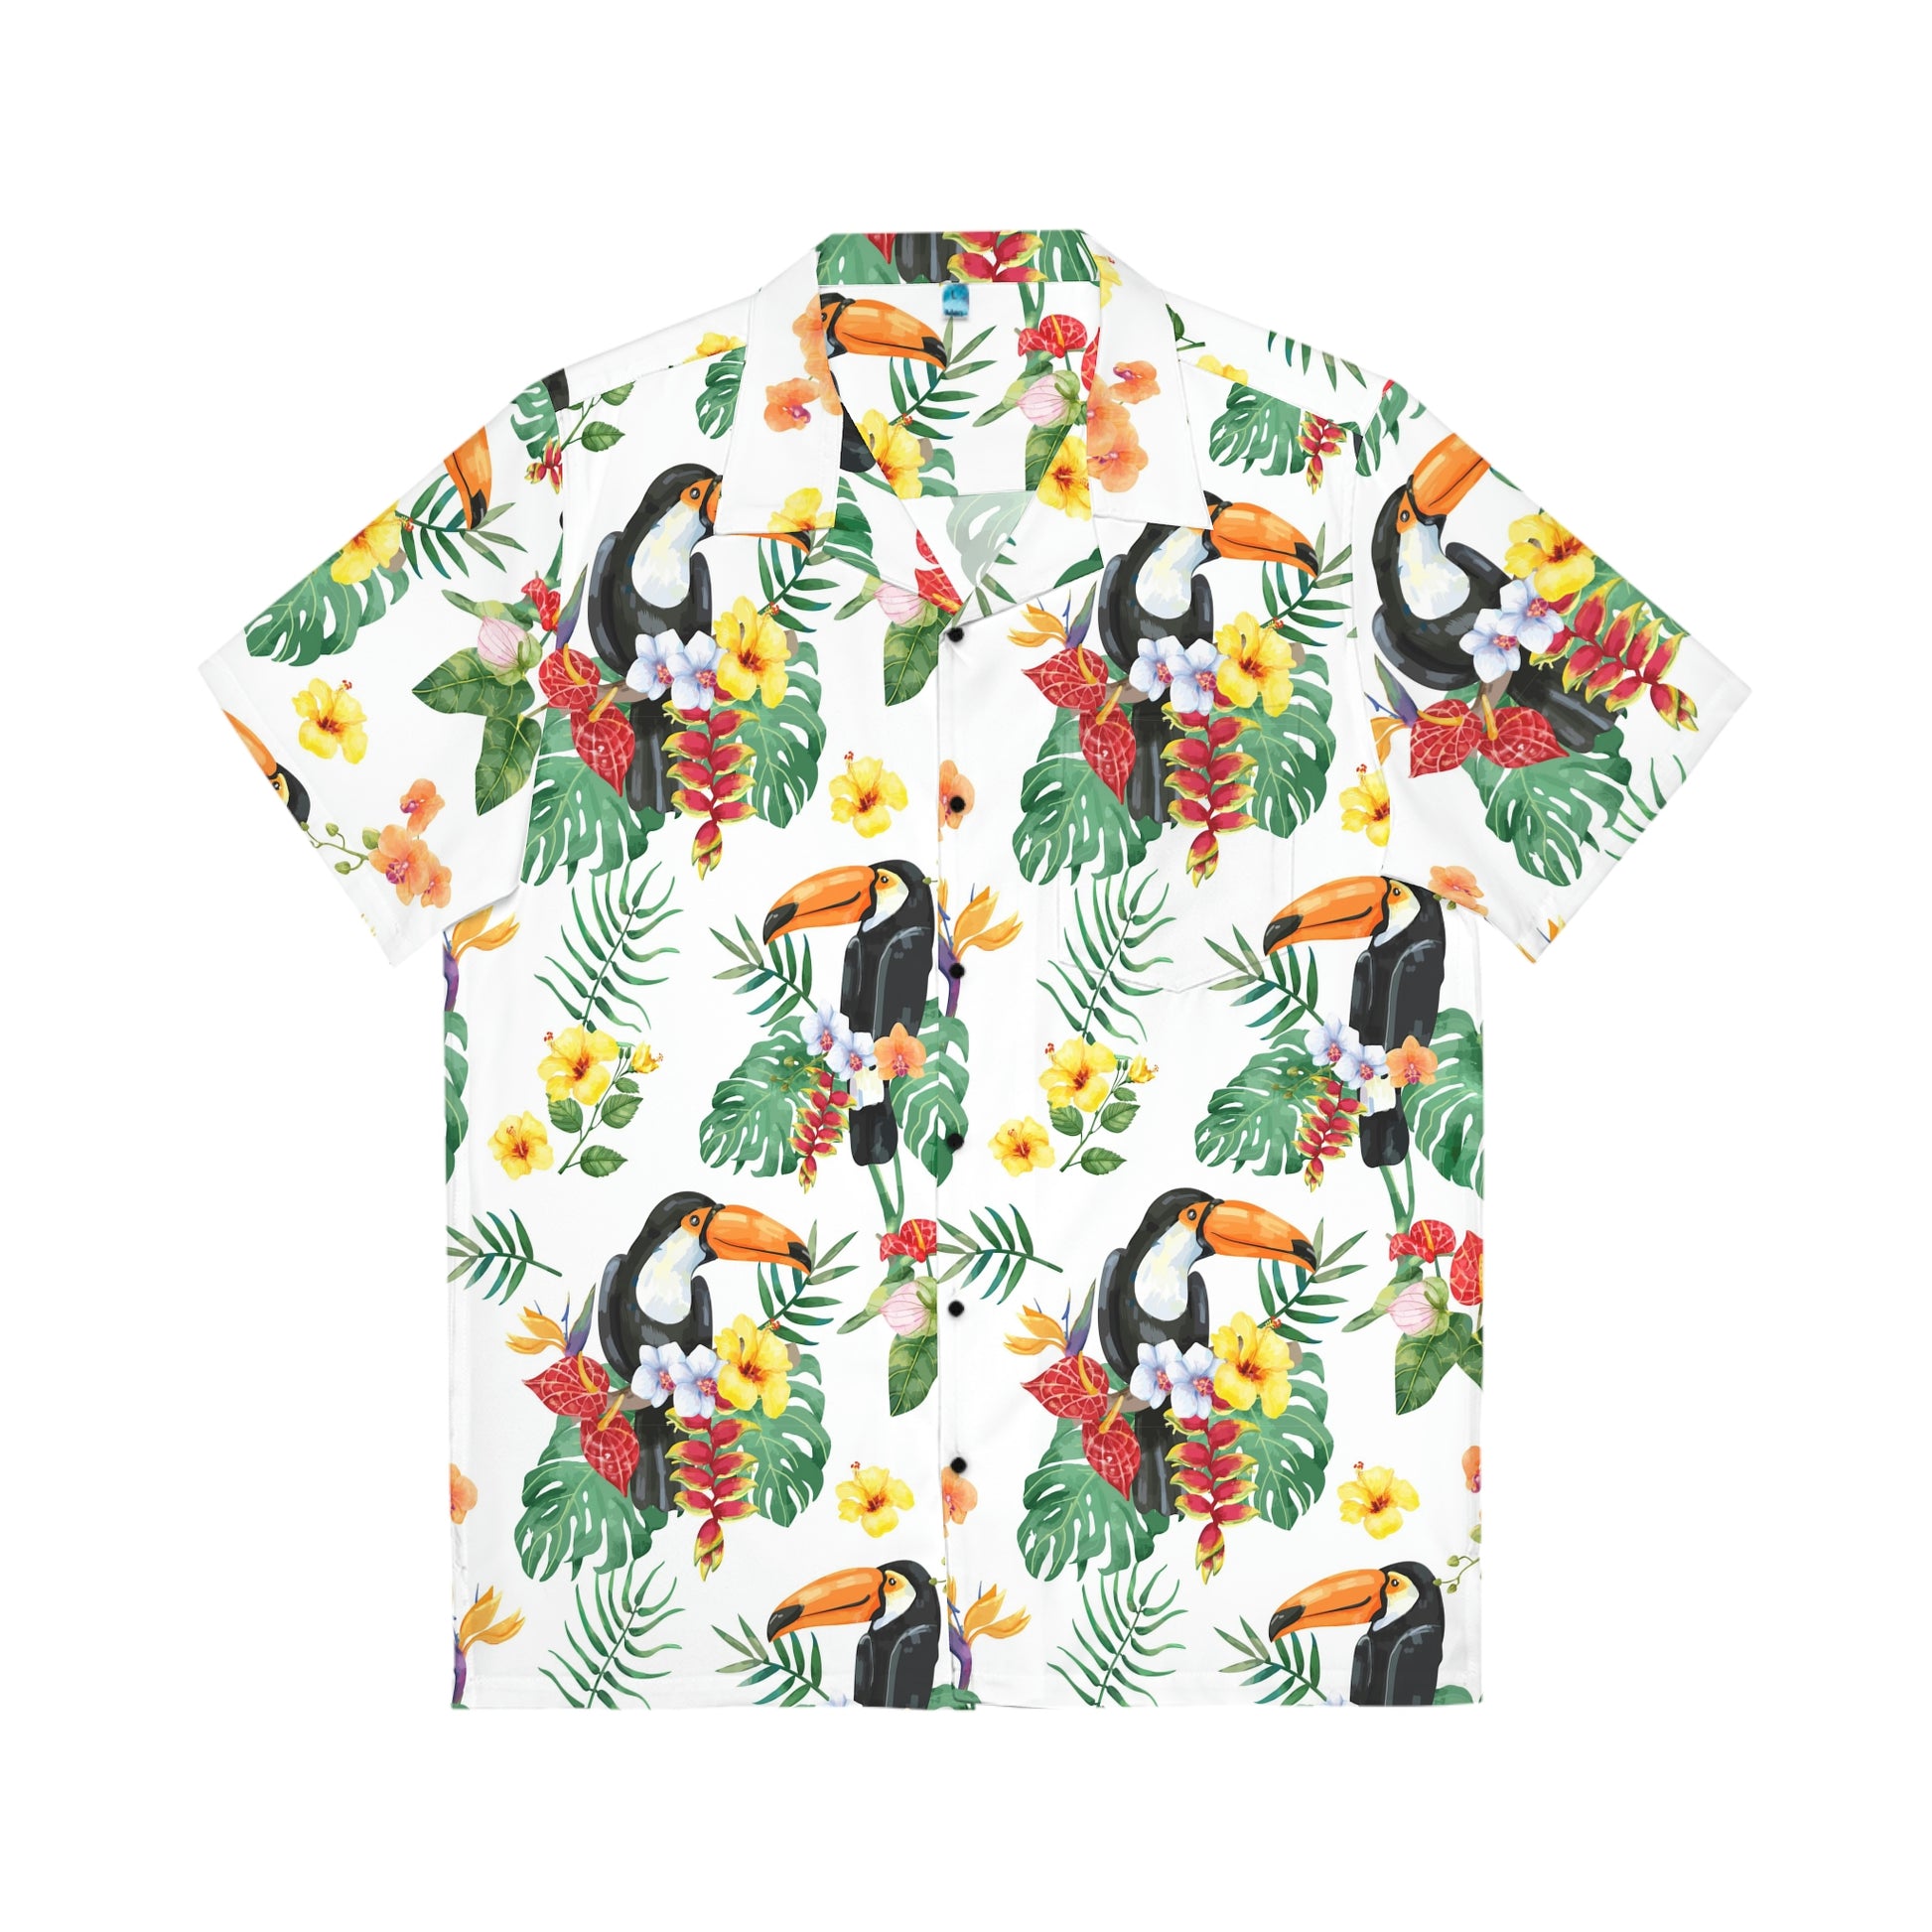 Toucans Chillin' - Carry On Crow Clothing Co.